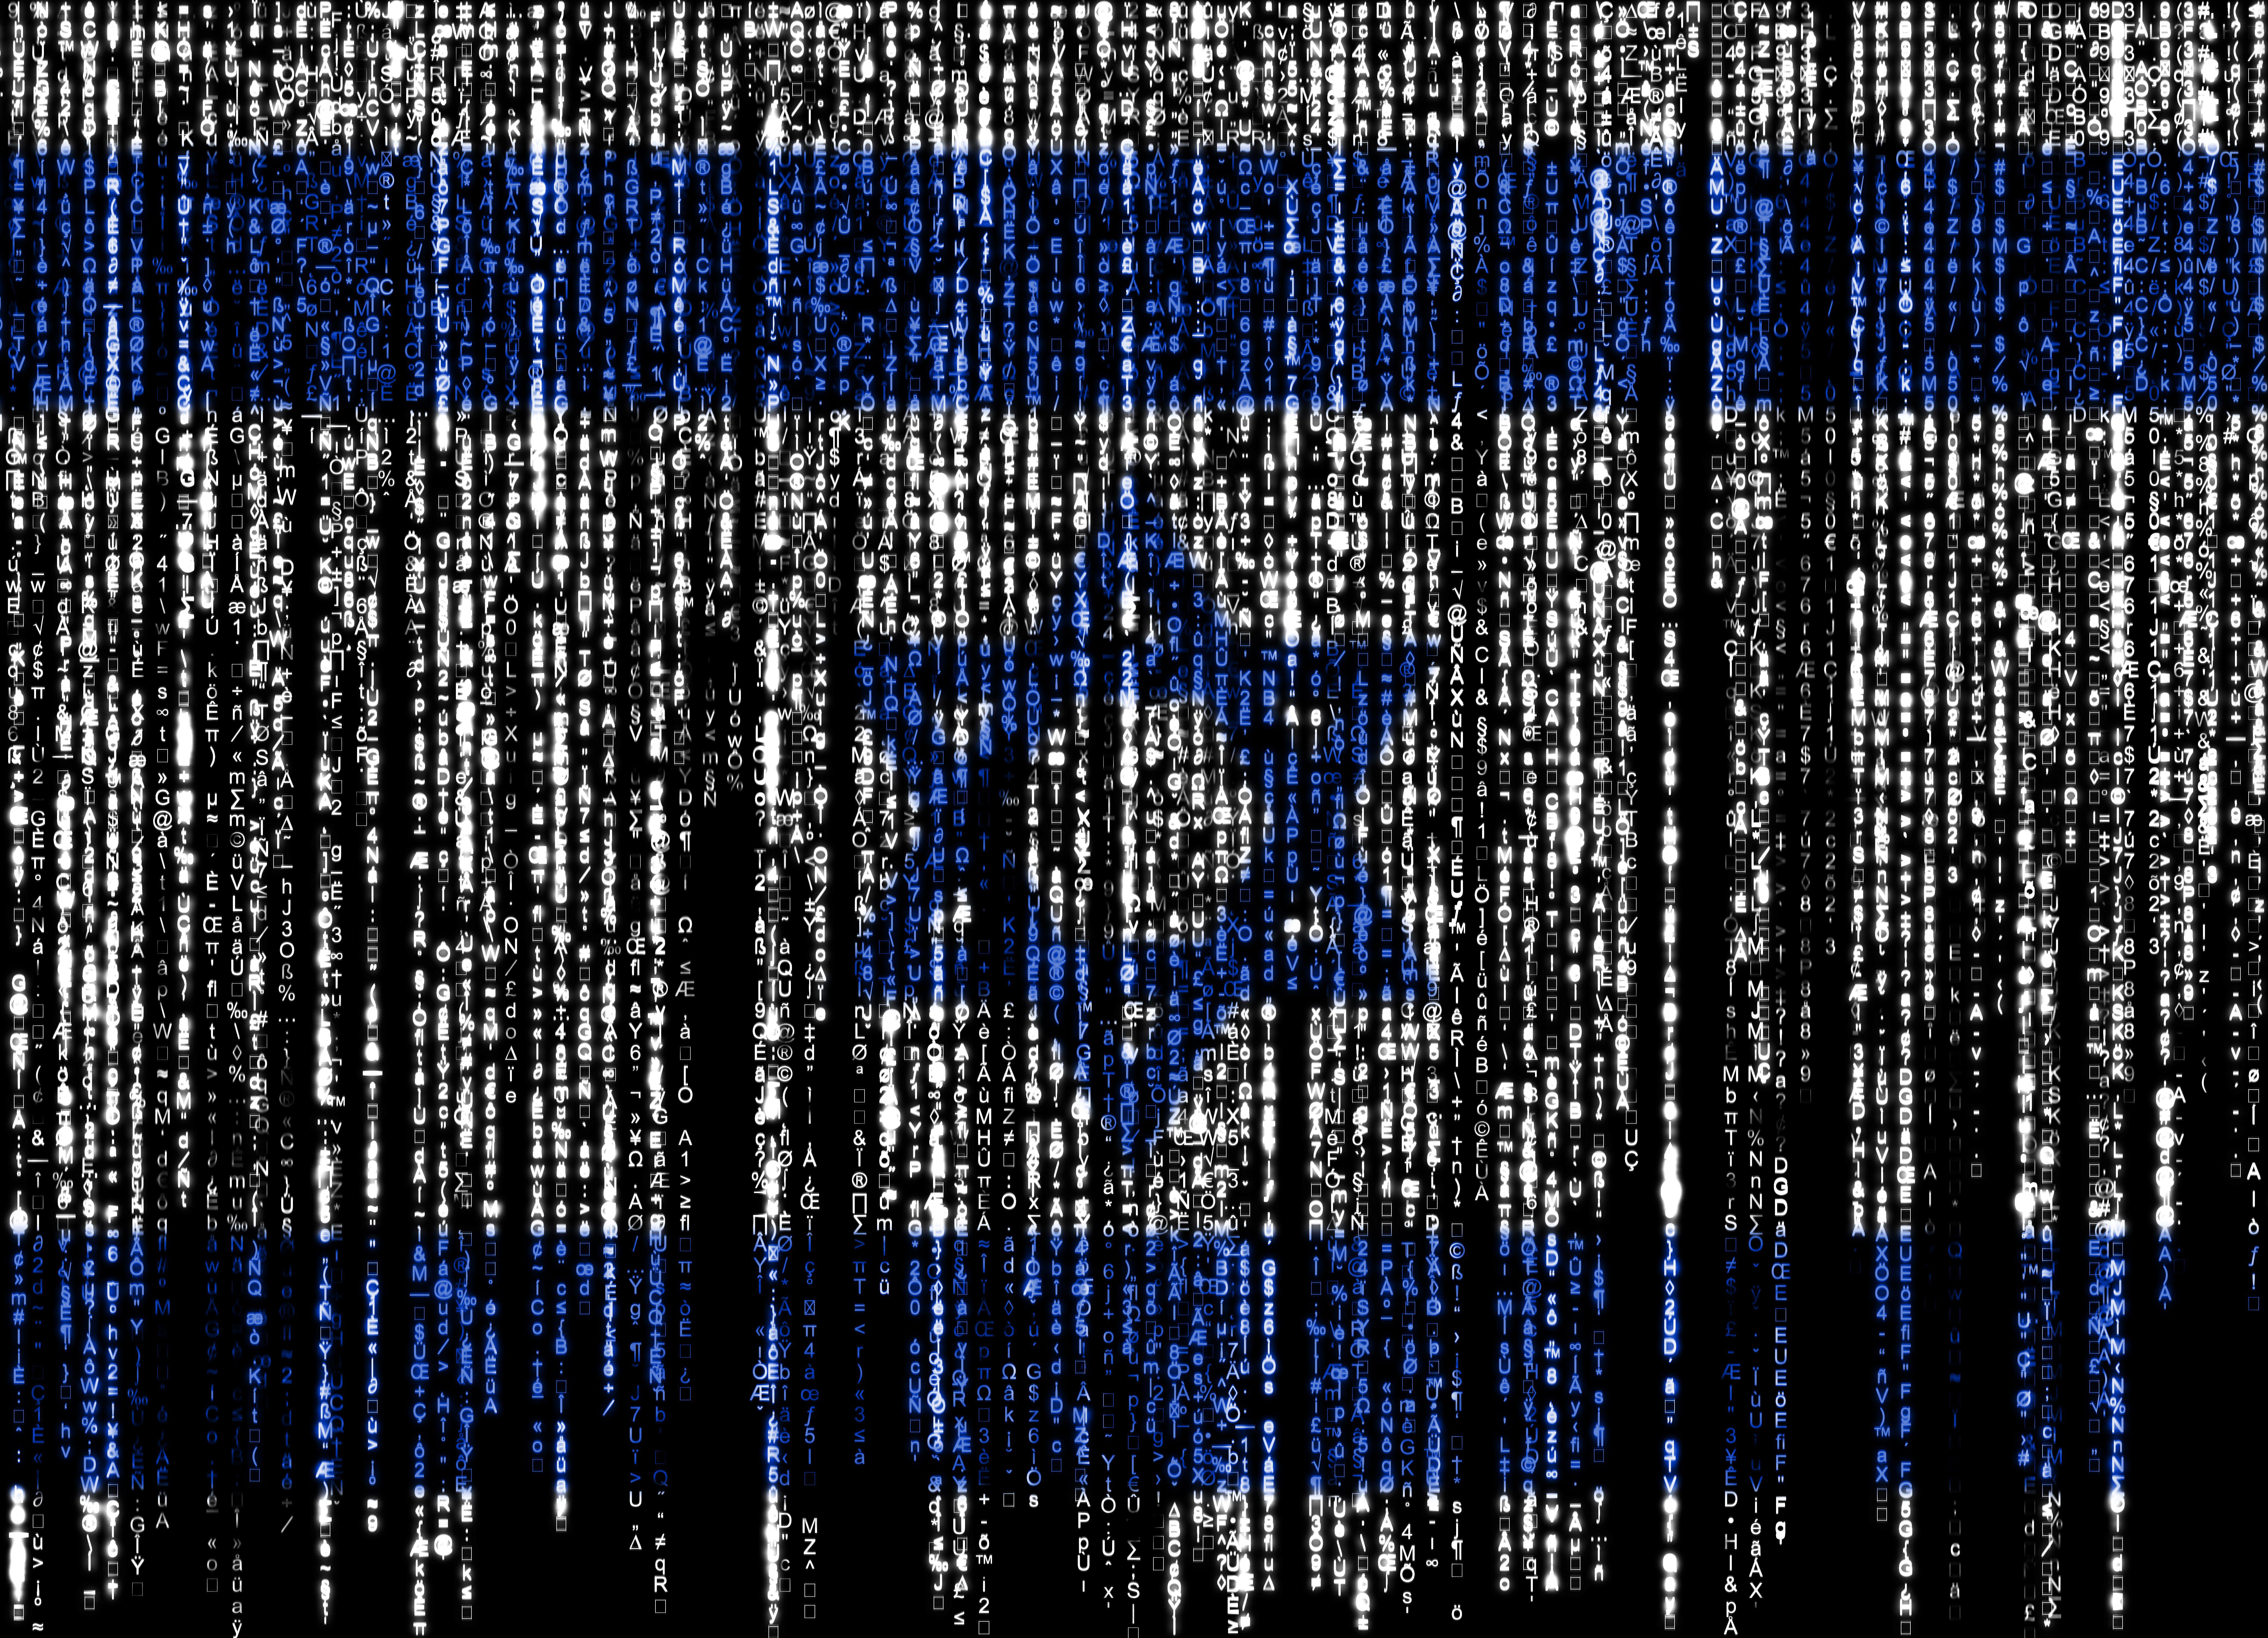 Israeli Cybersecurity Startups: Impact of a Growing Conflict